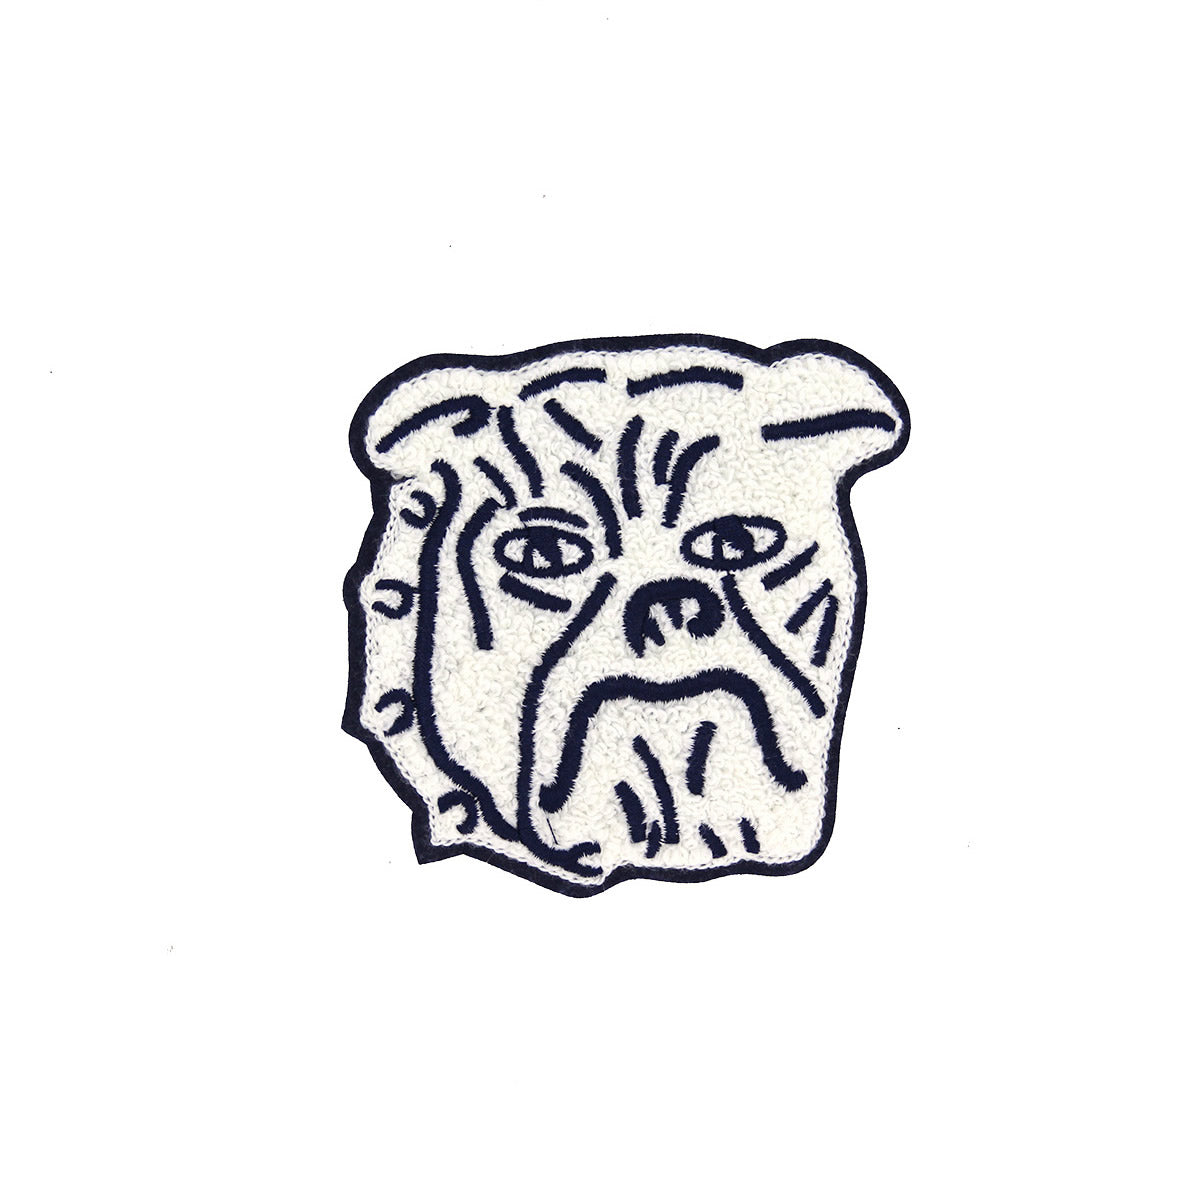 Load image into Gallery viewer, Vintage Bulldog Mascot Patch 2
